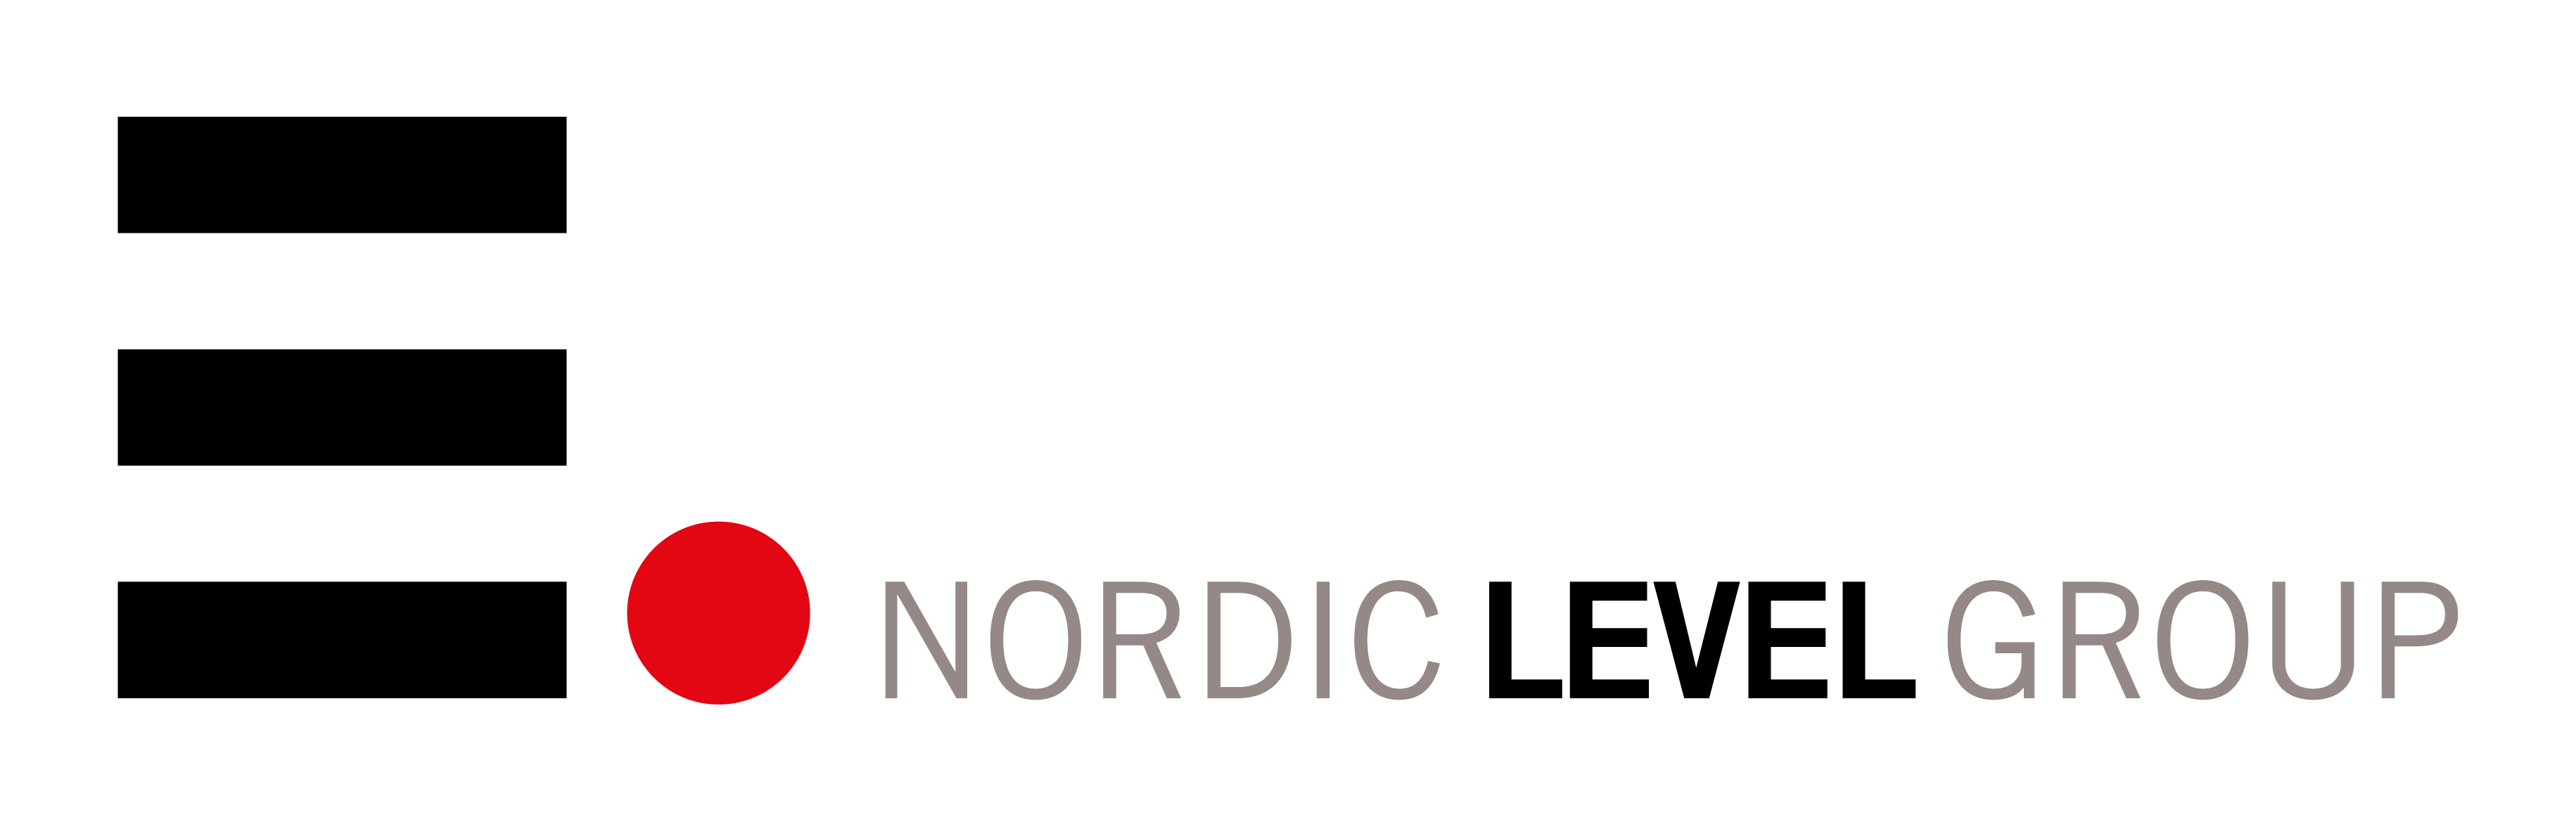 Nordic Level Group